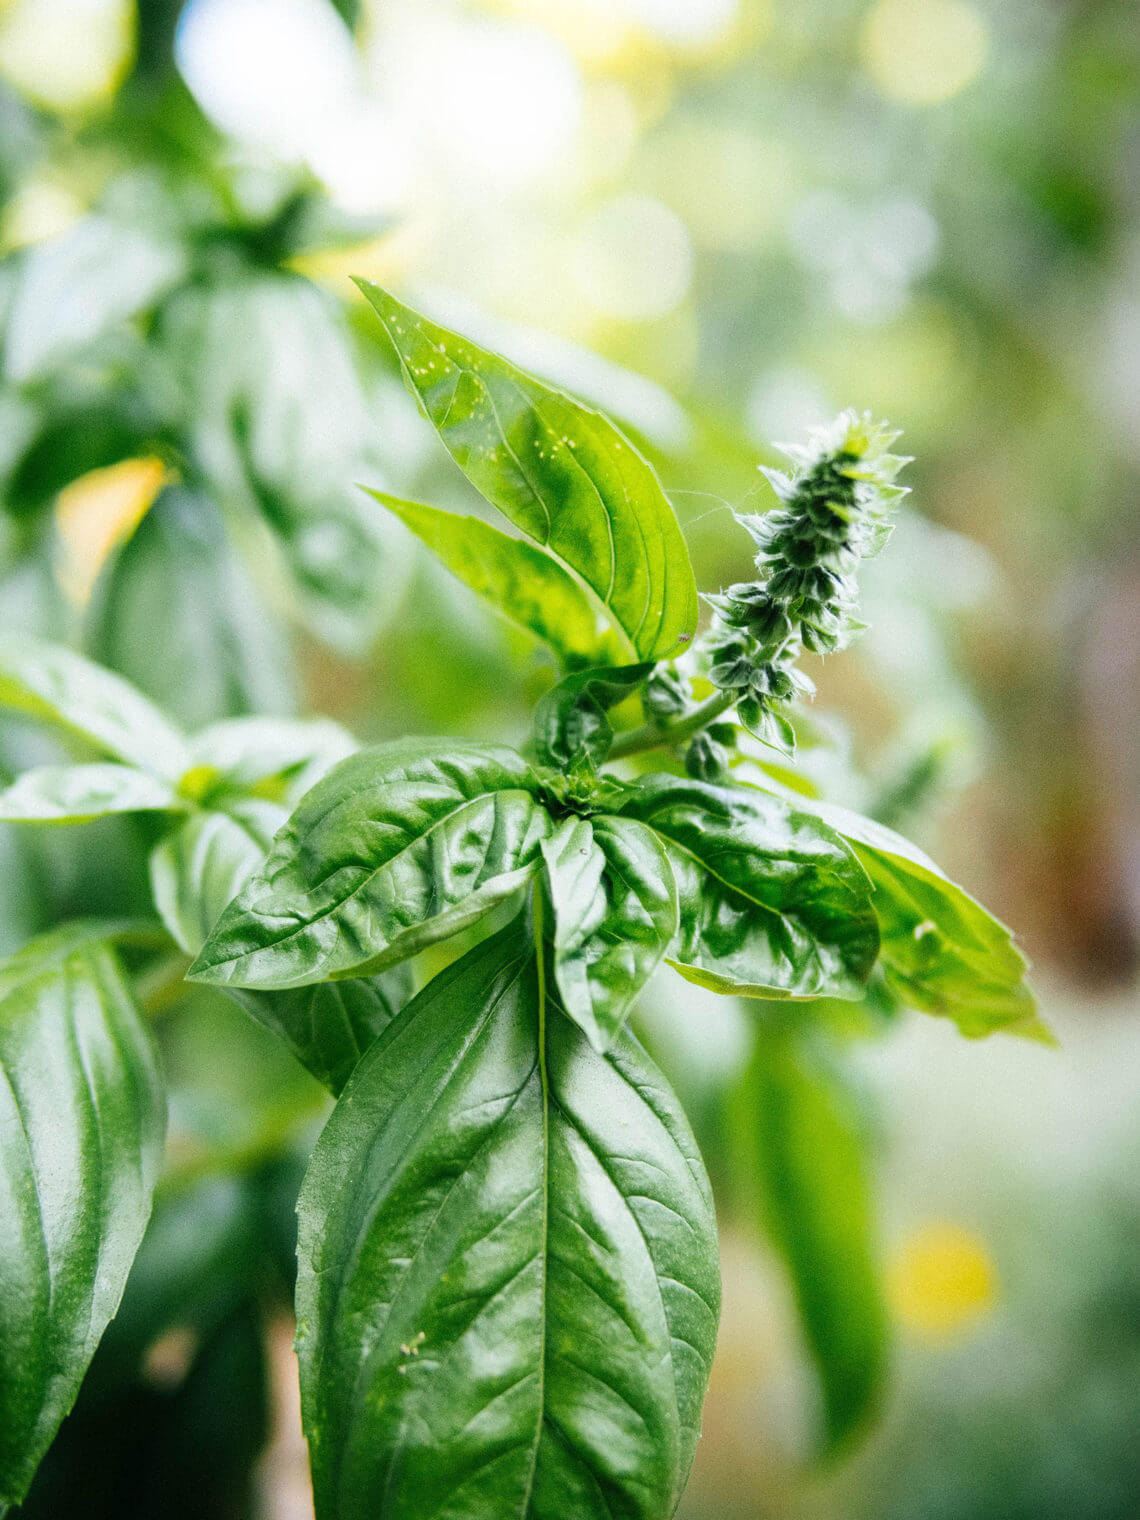 How to preserve basil the easy way